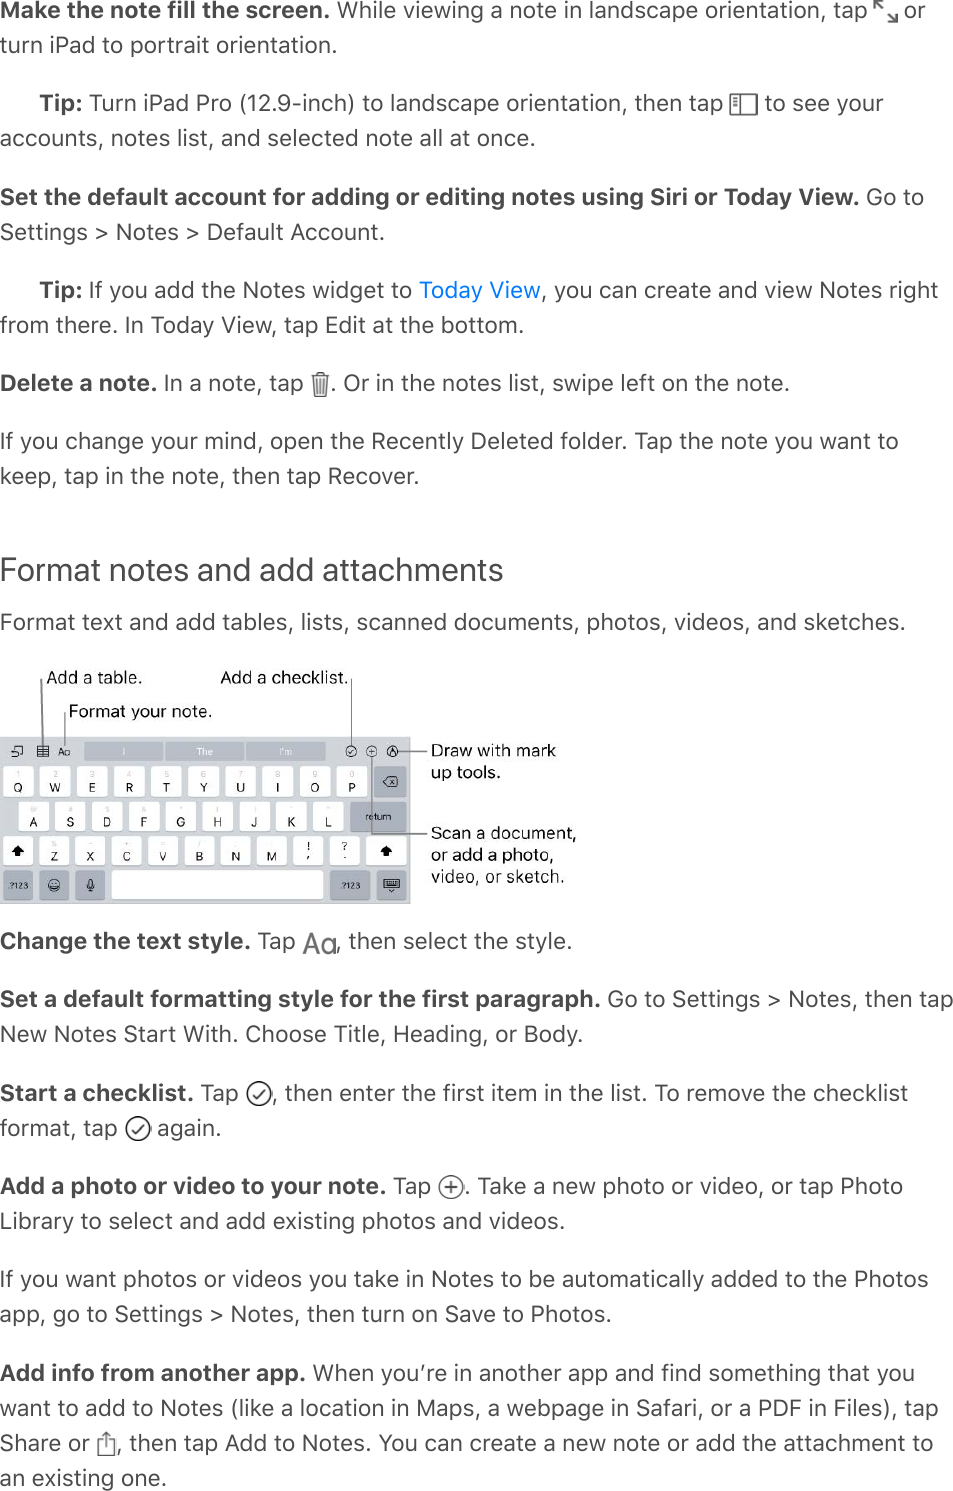 Make the note fill the screen. While viewing a note in landscape orientation, tap   orturn iPad to portrait orientation.Tip: Turn iPad Pro (12.9-inch) to landscape orientation, then tap   to see youraccounts, notes list, and selected note all at once.Set the default account for adding or editing notes using Siri or Today View. Go toSettings &gt; Notes &gt; Default Account.Tip: If you add the Notes widget to  , you can create and view Notes rightfrom there. In Today View, tap Edit at the bottom.Delete a note. In a note, tap  . Or in the notes list, swipe left on the note.If you change your mind, open the Recently Deleted folder. Tap the note you want tokeep, tap in the note, then tap Recover.Format notes and add attachmentsFormat text and add tables, lists, scanned documents, photos, videos, and sketches.Change the text style. Tap  , then select the style.Set a default formatting style for the first paragraph. Go to Settings &gt; Notes, then tapNew Notes Start With. Choose Title, Heading, or Body.Start a checklist. Tap  , then enter the first item in the list. To remove the checklistformat, tap   again.Add a photo or video to your note. Tap  . Take a new photo or video, or tap PhotoLibrary to select and add existing photos and videos.If you want photos or videos you take in Notes to be automatically added to the Photosapp, go to Settings &gt; Notes, then turn on Save to Photos.Add info from another app. When youʼre in another app and find something that youwant to add to Notes (like a location in Maps, a webpage in Safari, or a PDF in Files), tapShare or  , then tap Add to Notes. You can create a new note or add the attachment toan existing one.Today View